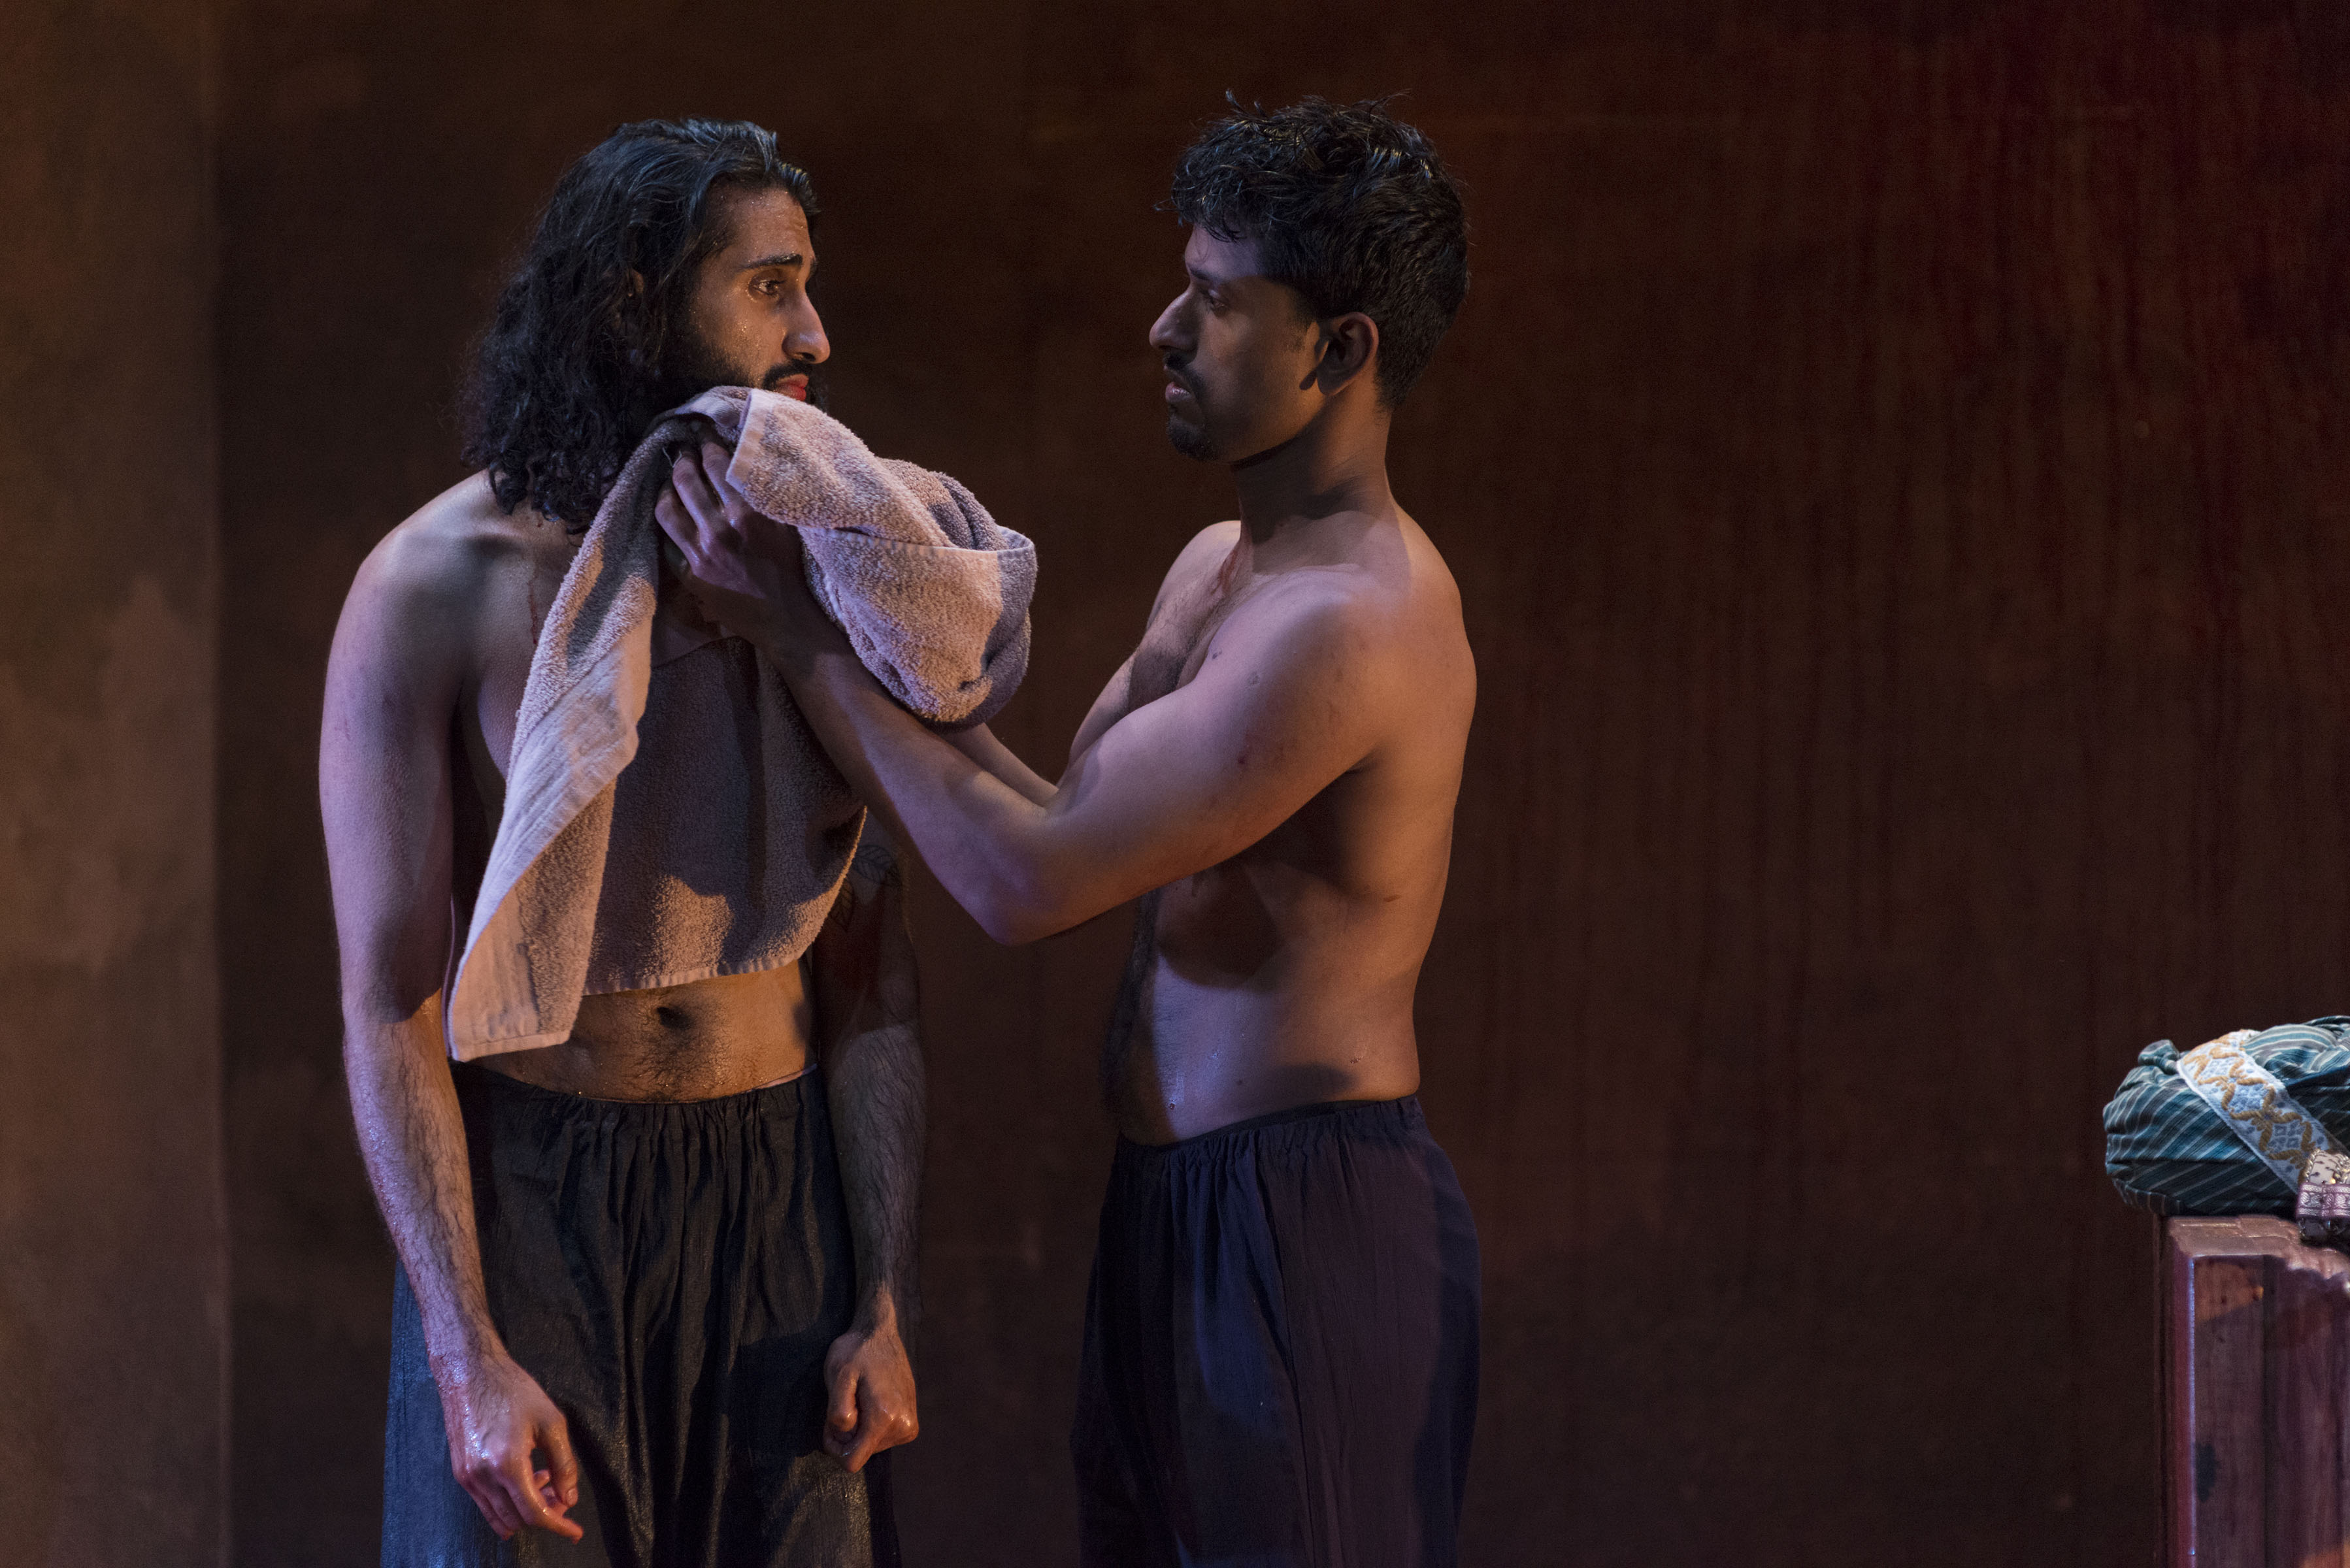 Harsh J. Gagoomal & Jacob Aythal in <strong><em>Guards at the Taj</em></strong>. Photo: A.R. Sinclair Photography.